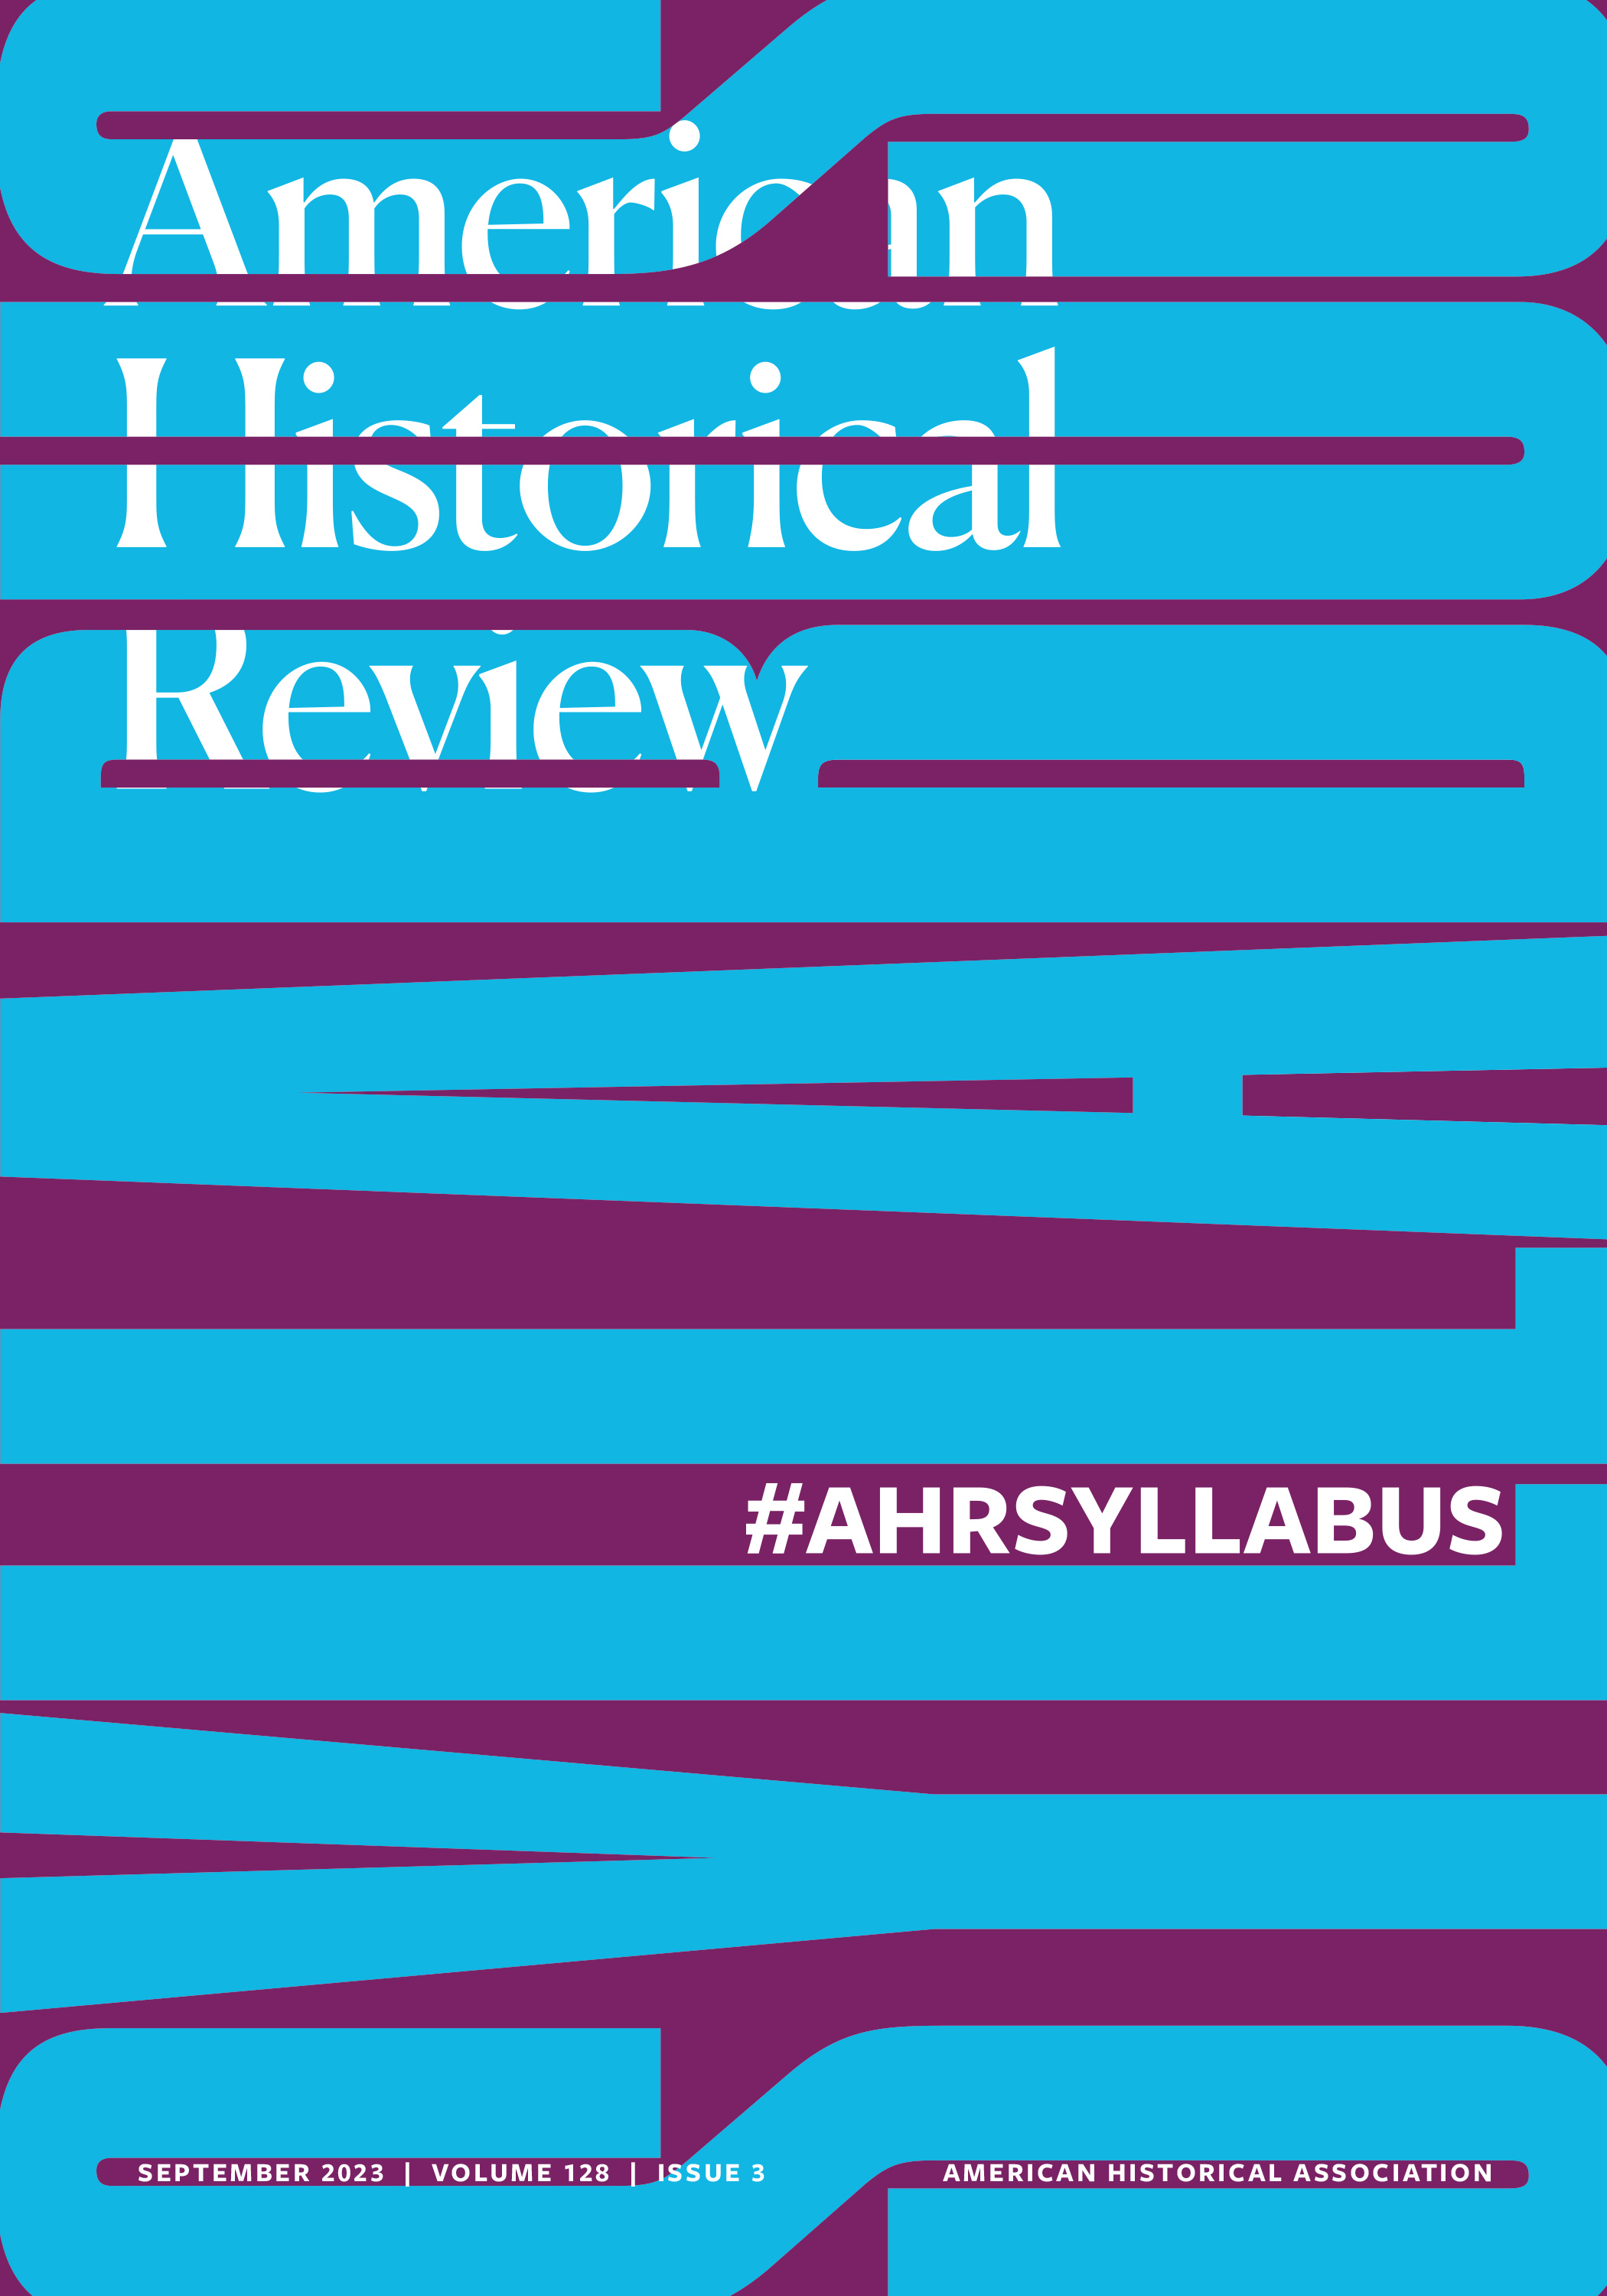 Cover of the June 2023 issue of the American Historical Review